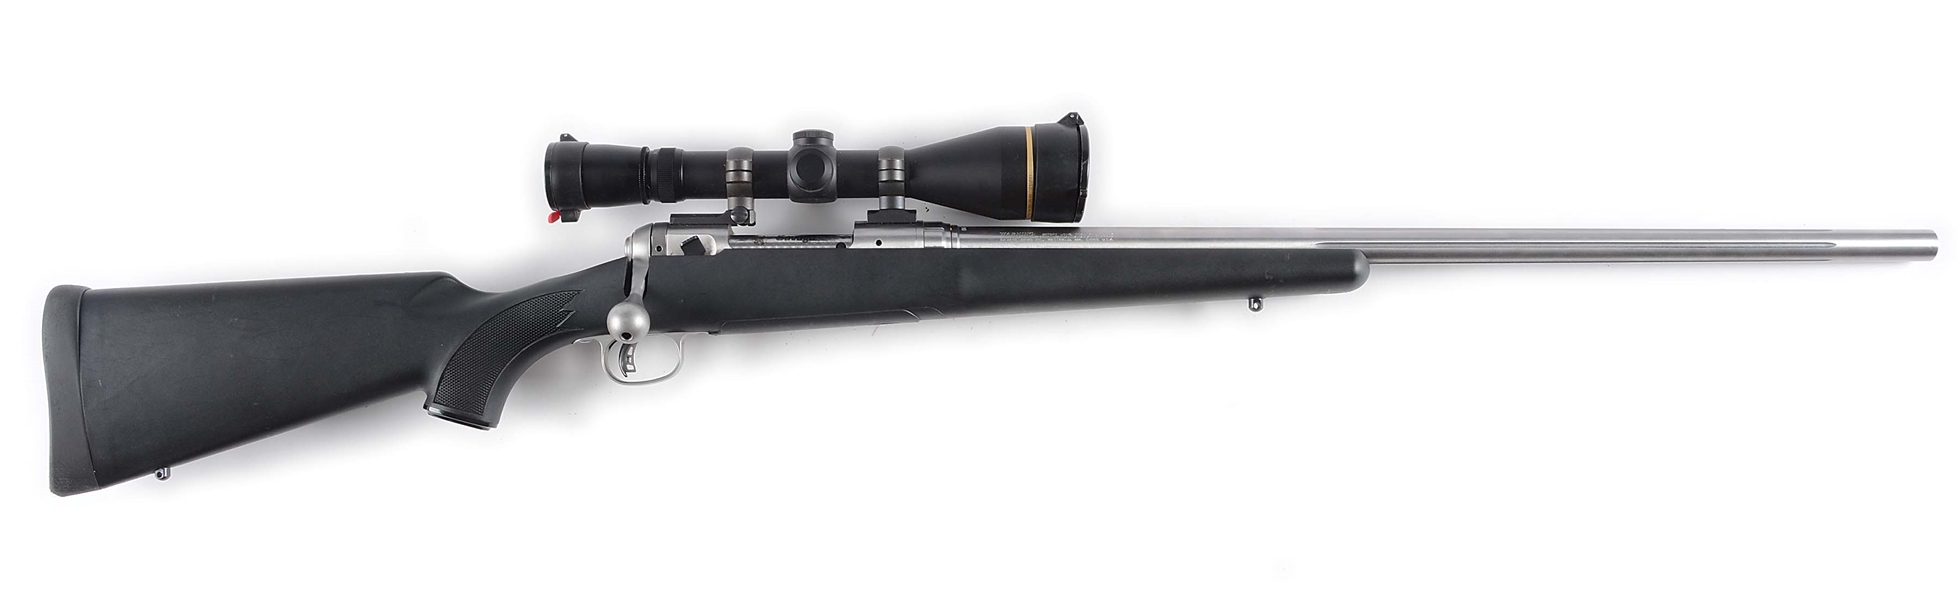 (M) SAVAGE ARMS MODEL 12 BOLT ACTION RIFLE WITH LEUPOLD SCOPE.